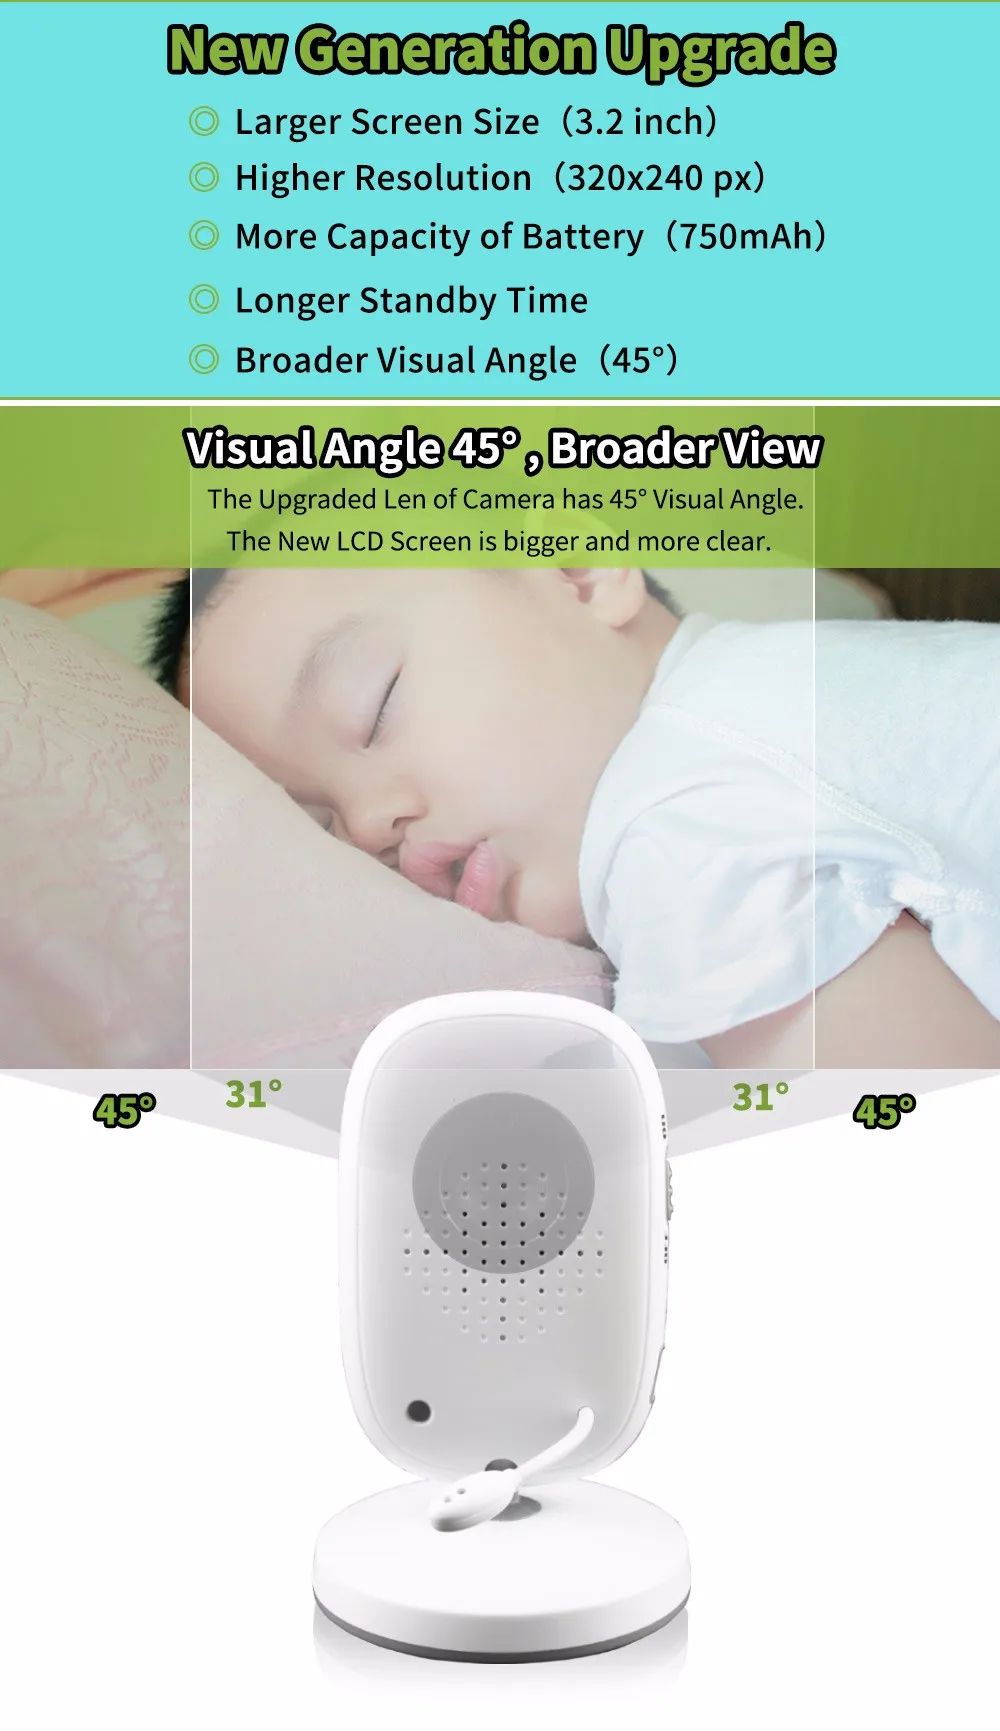 3.2 inch Wireless Video Color Baby Monitor High Resolution Baby Nanny Security Camera  Night Vision Temperature Monitoring floodlight cam surveillance cameras